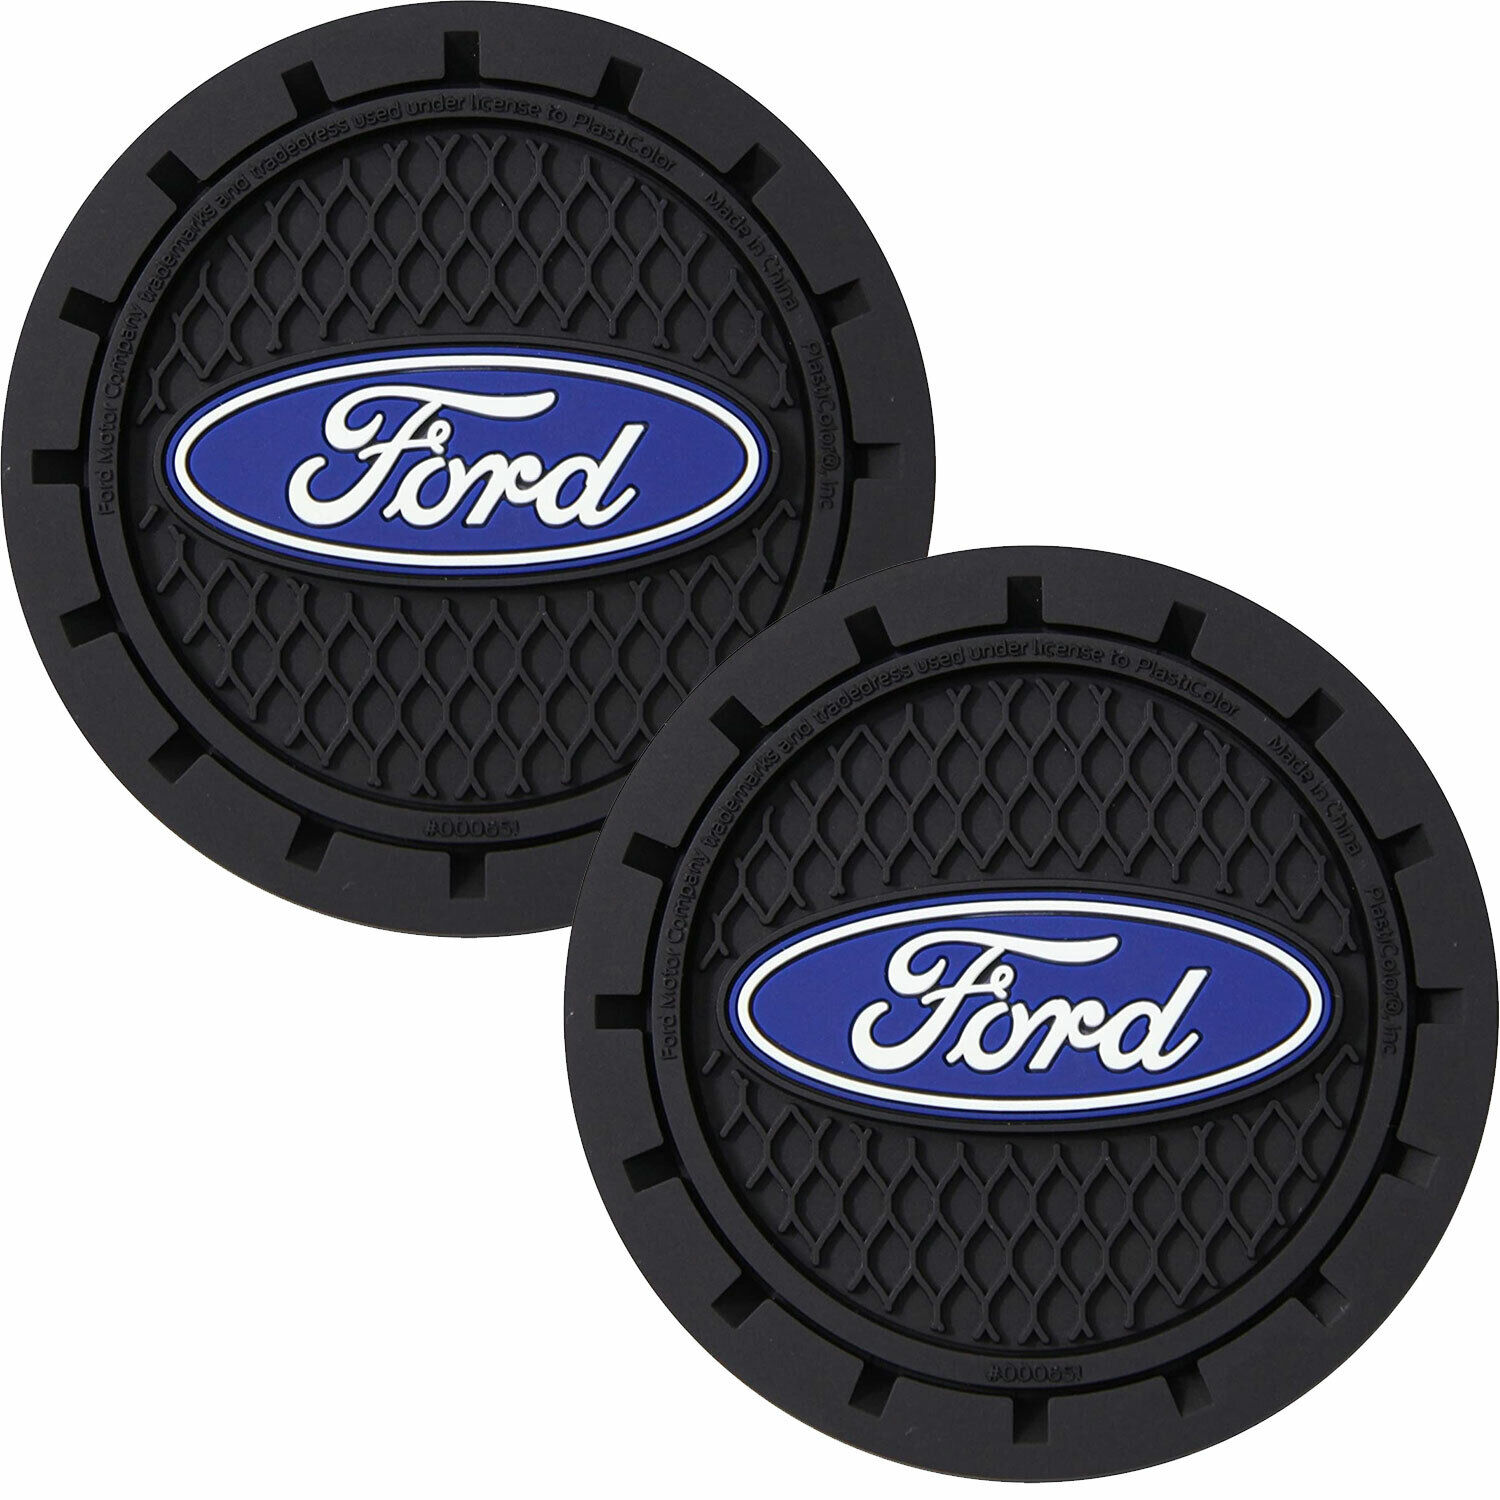 Plasticolor Ford Car Coaster, 2x Cupholder Coasters with the Blue Ford Oval Logo